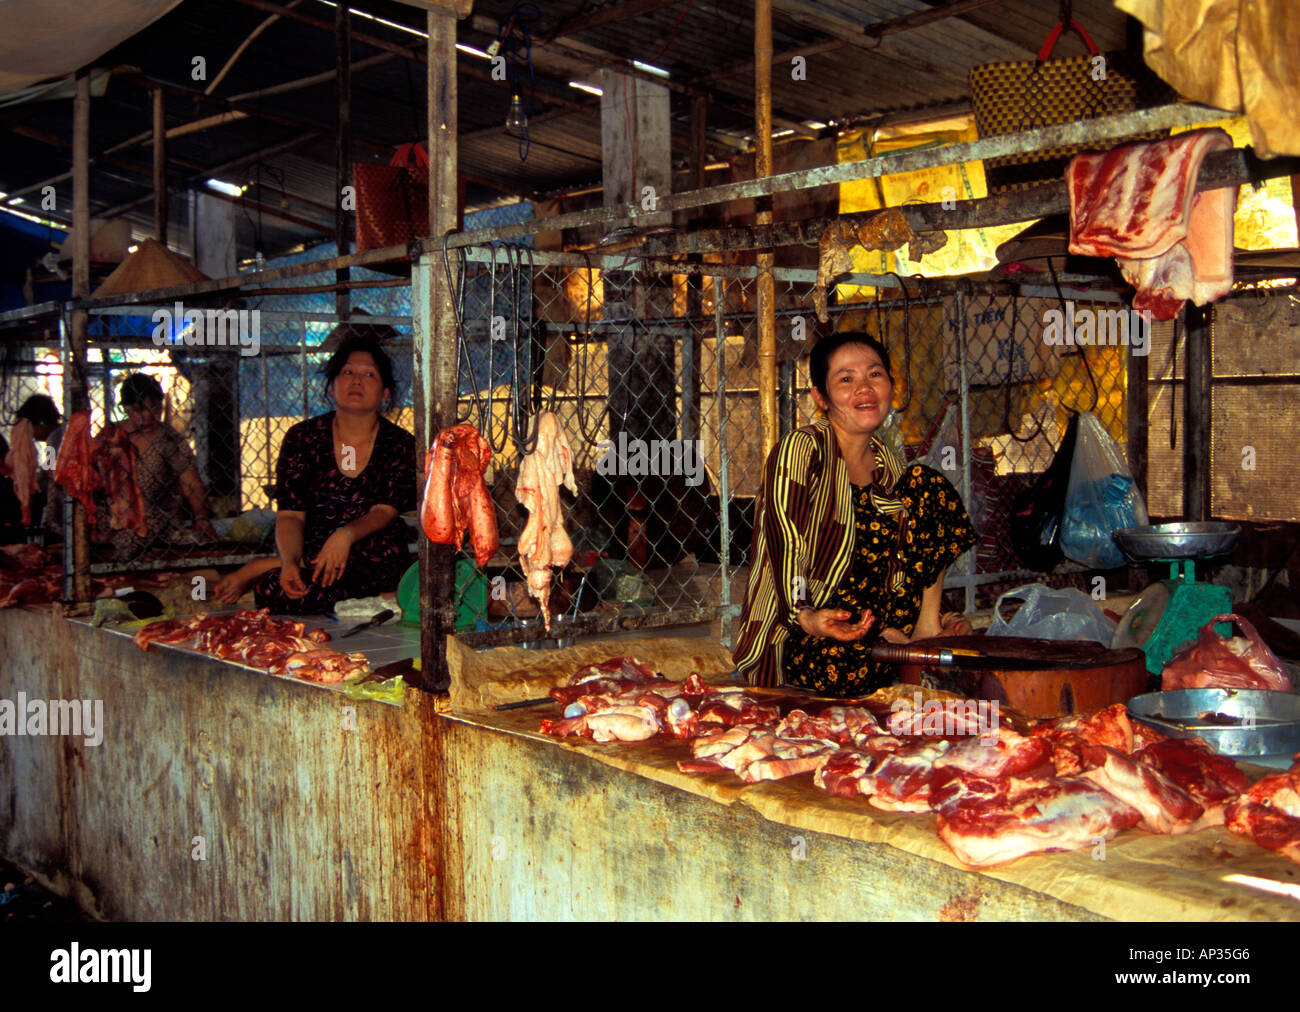 Women selling meat from cages in marketplace, Mekong Delta, South Vietnam Stock Photo